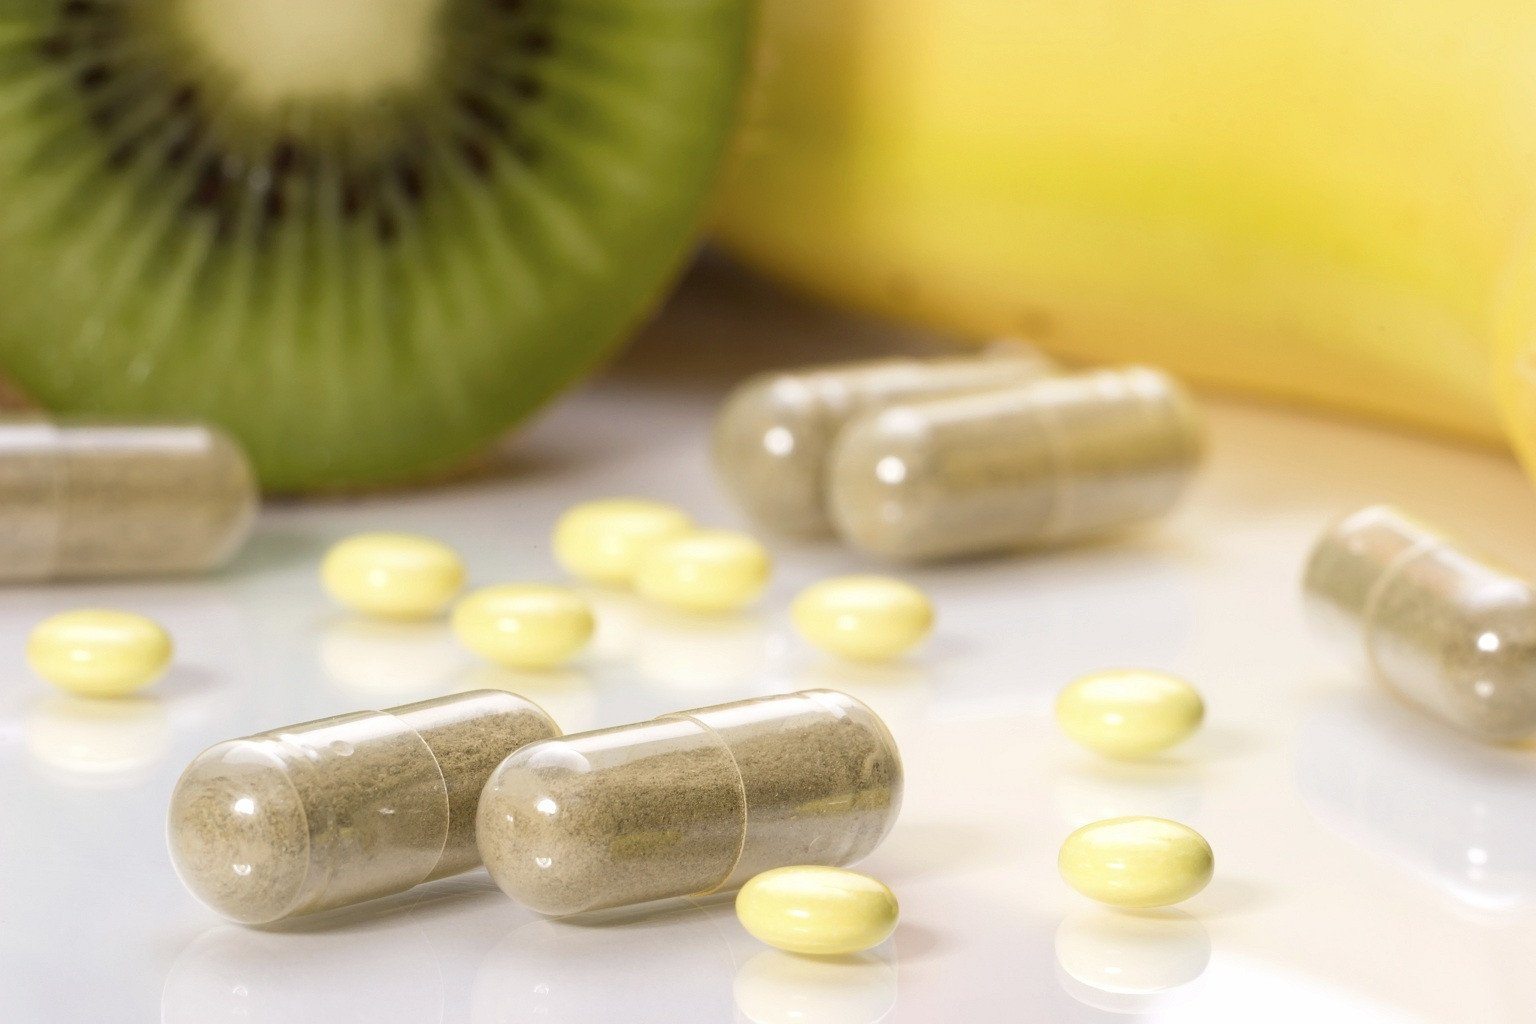 Do We Really Need Supplements?